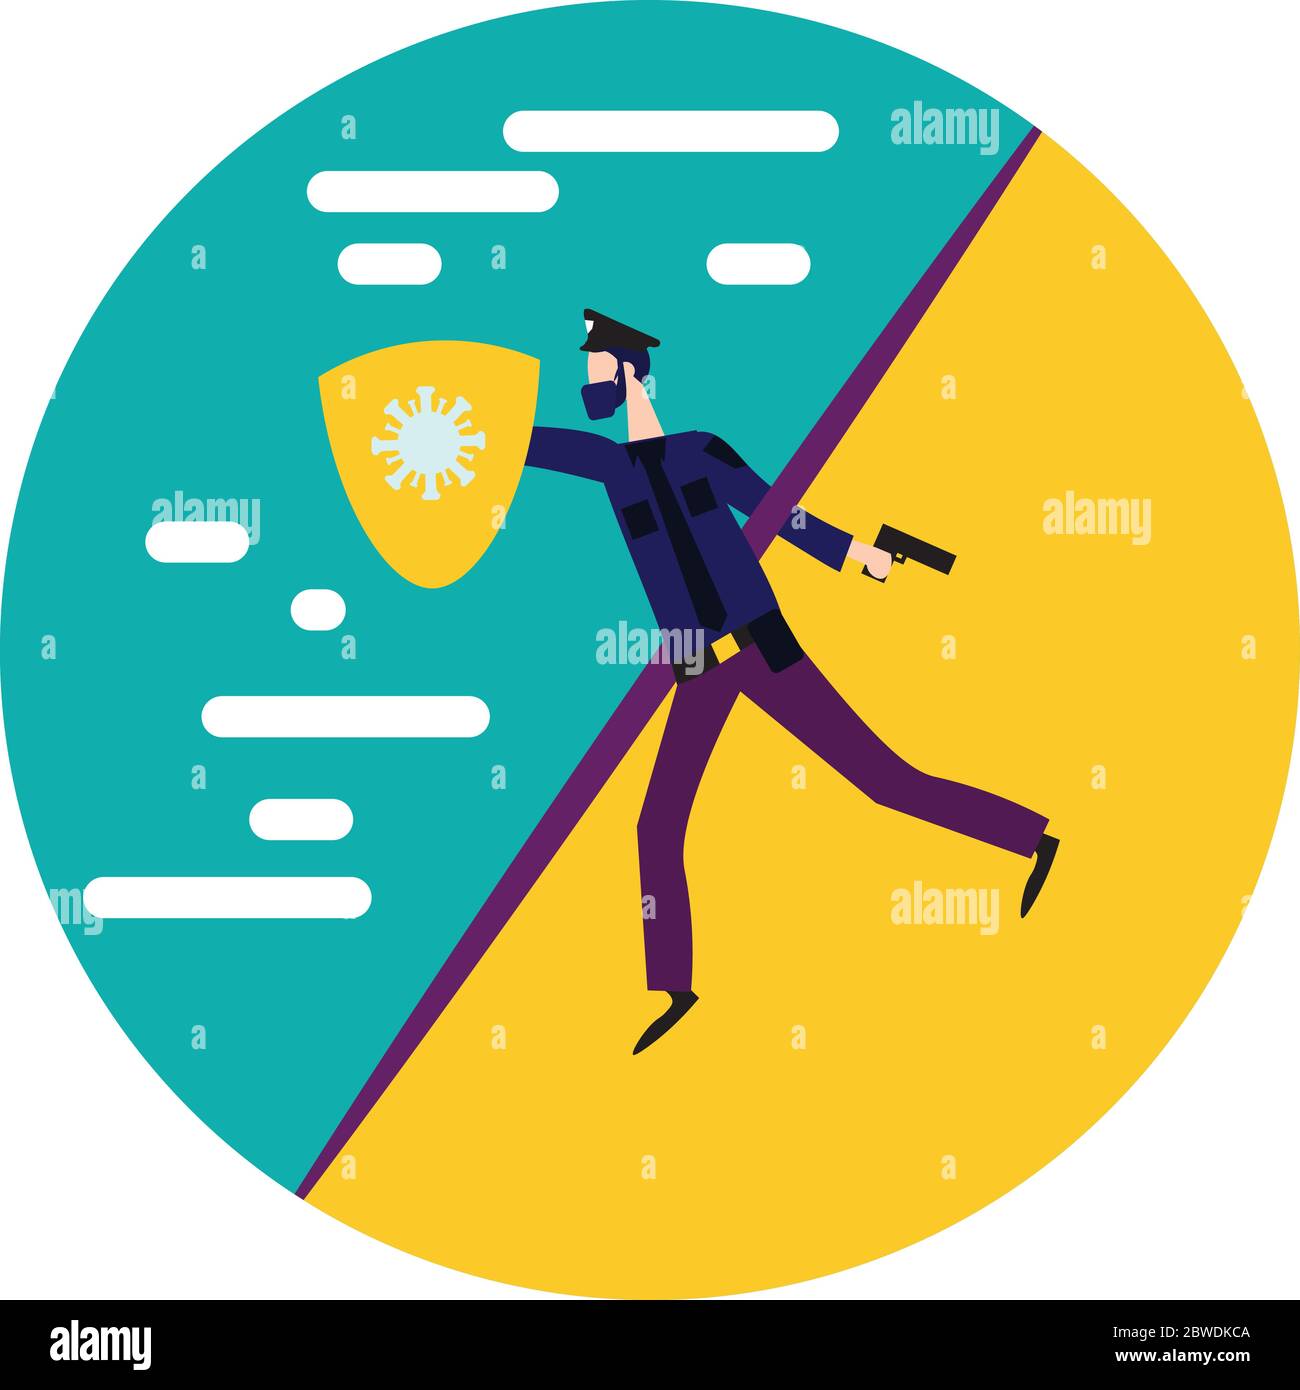 A Masked Man Police using A Shield runs From Normal into New Normal Condition Due to Corona Virus 19 Pandemic Stock Vector